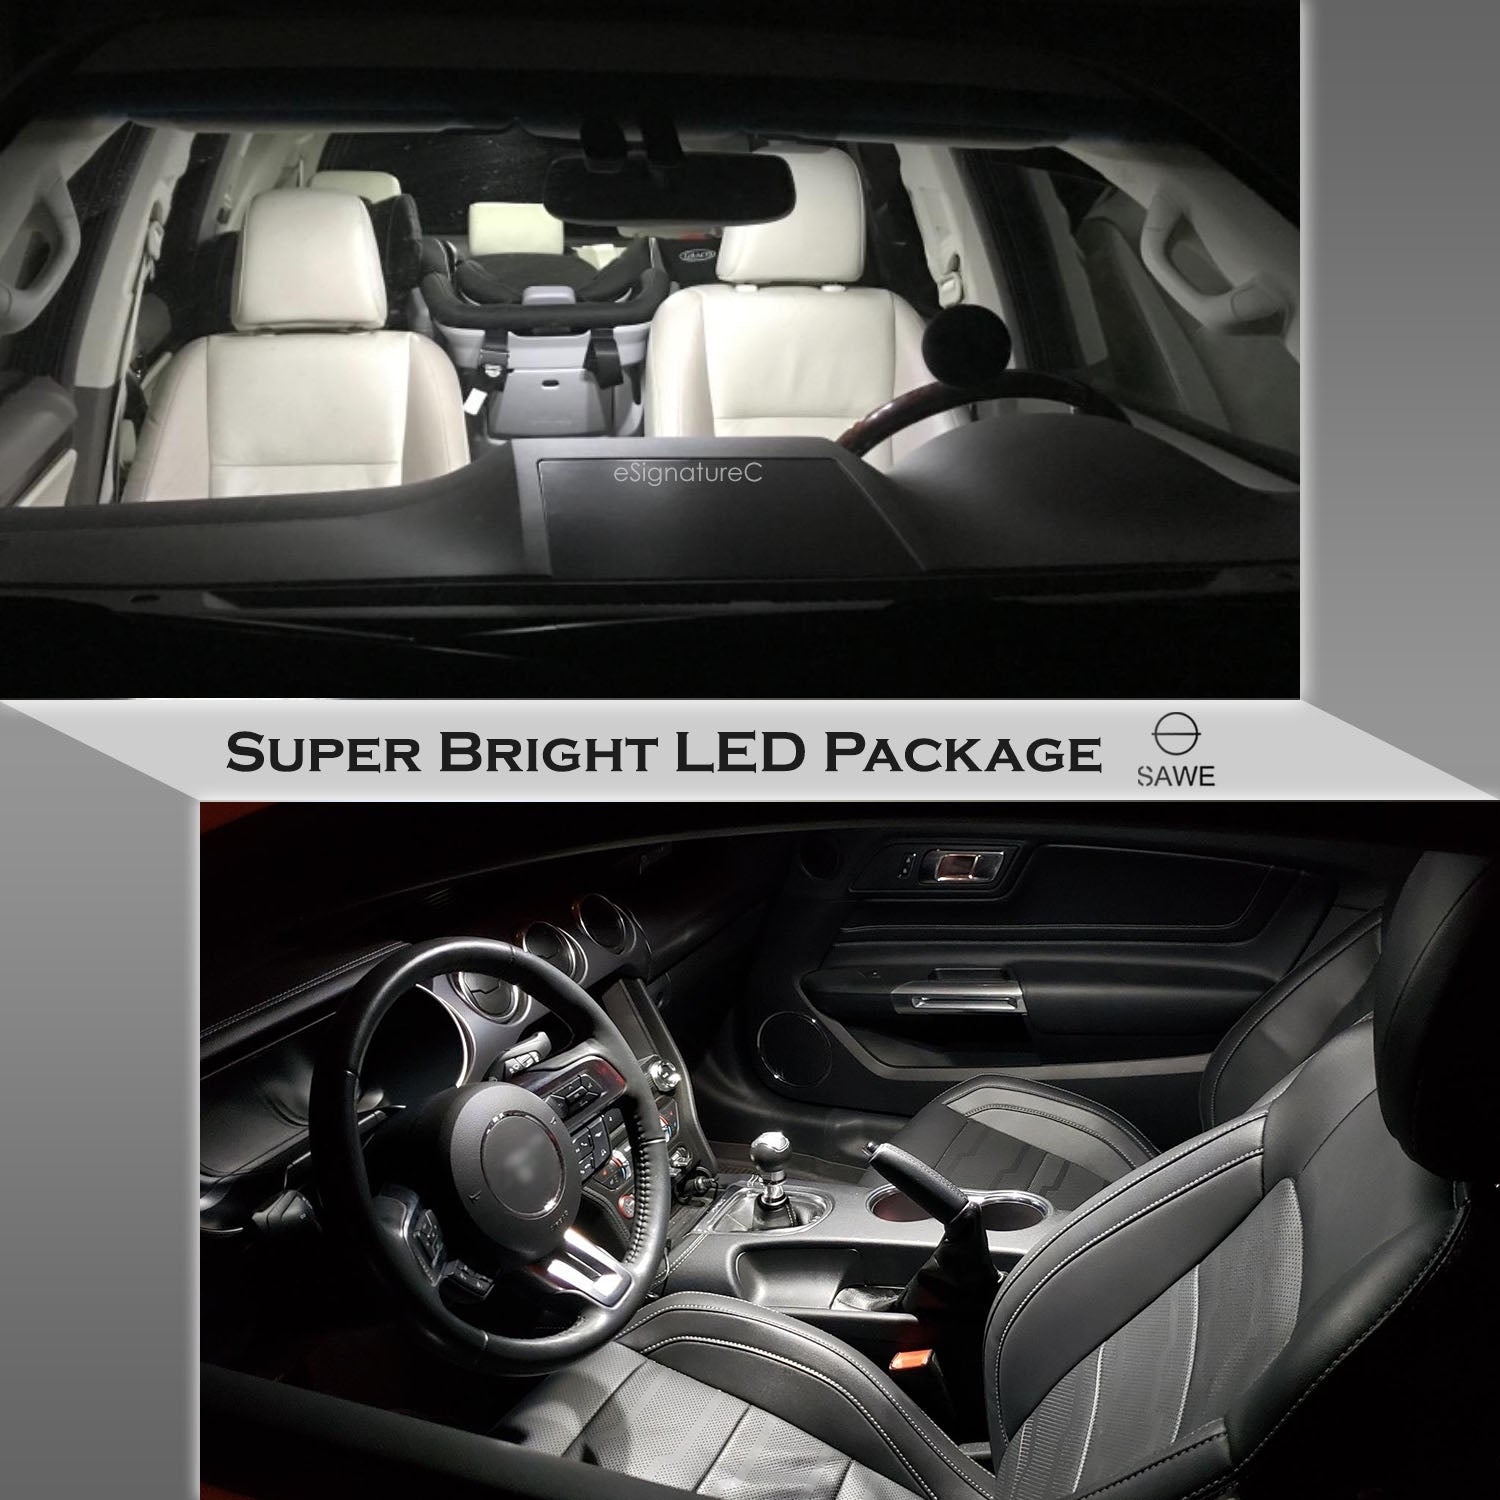 For Ford Taurus Interior LED Lights - Dome & Map Light Bulbs Package Kit for 2010 - 2017 - White